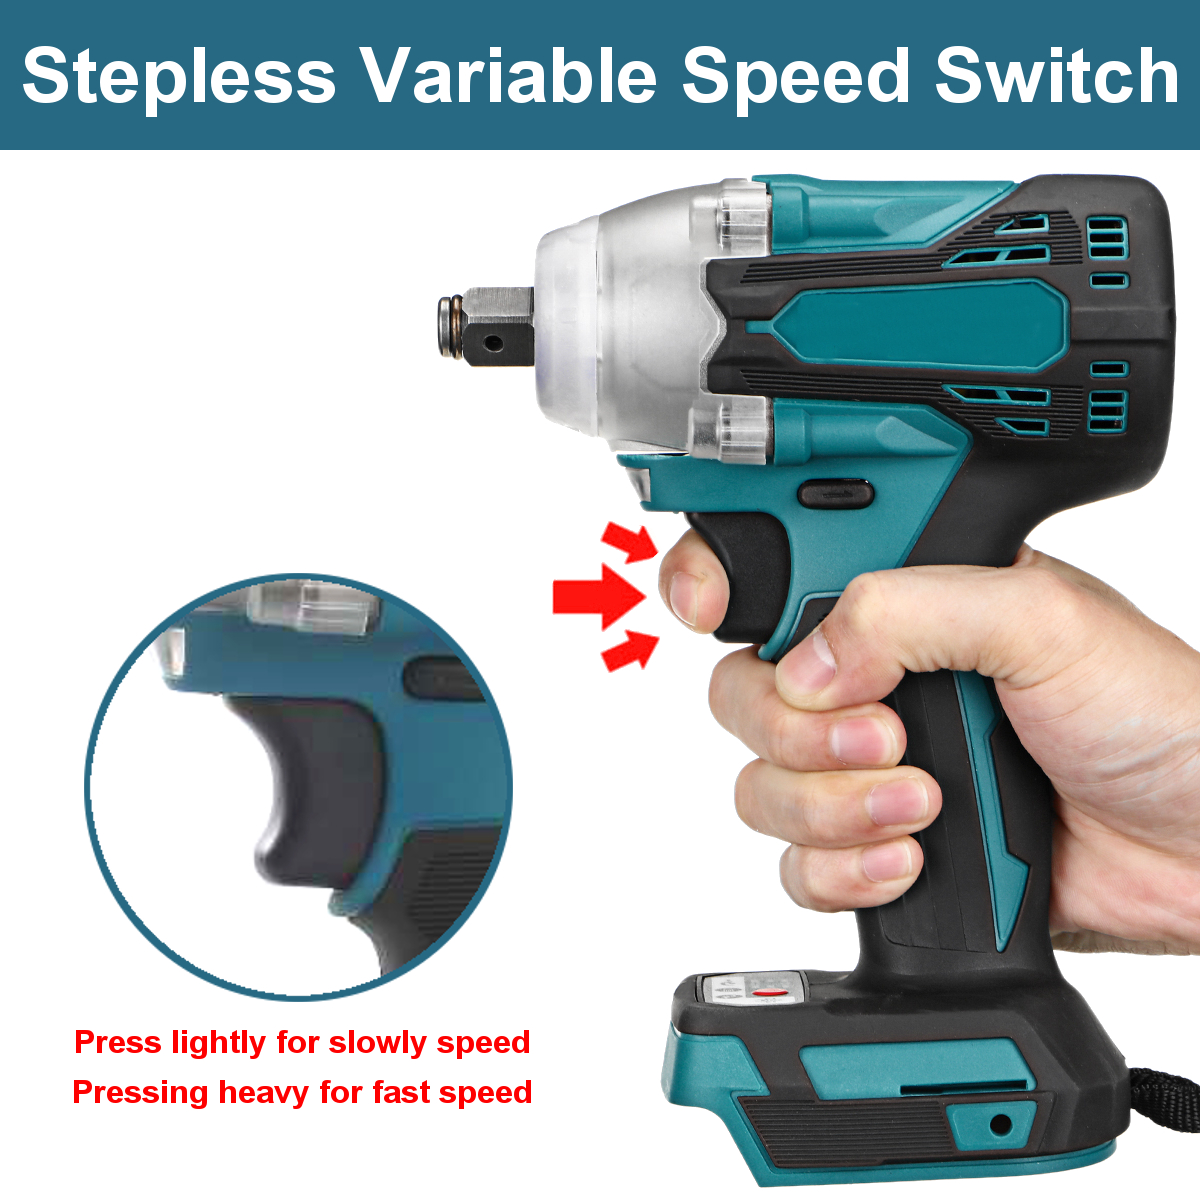 DTW300-2-in1-18V-800Nm-Li-Ion-Brushless-Cordless-12quot-Electric-Wrench-14quotScrewdriver-Drill-Repl-1854869-9